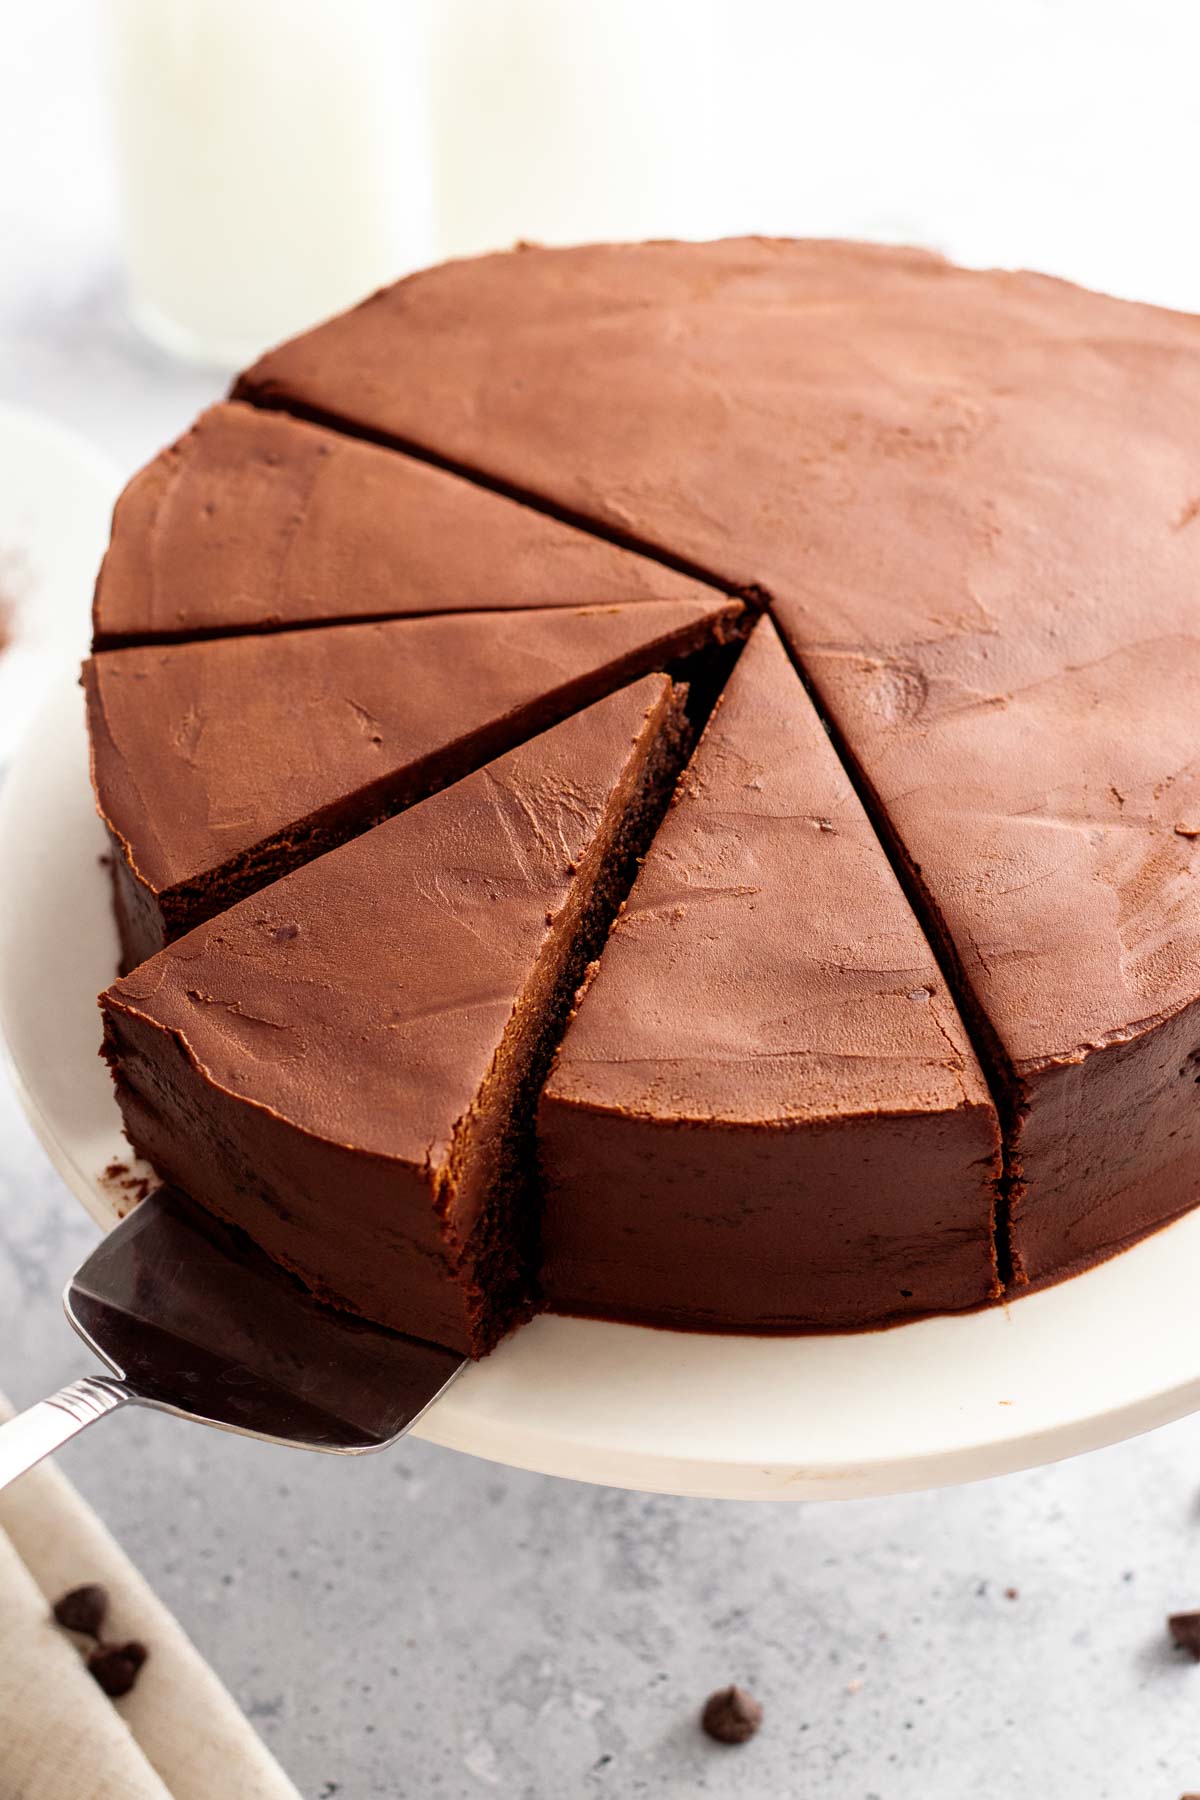 Slice pulled away from a chocolate fudge cake.